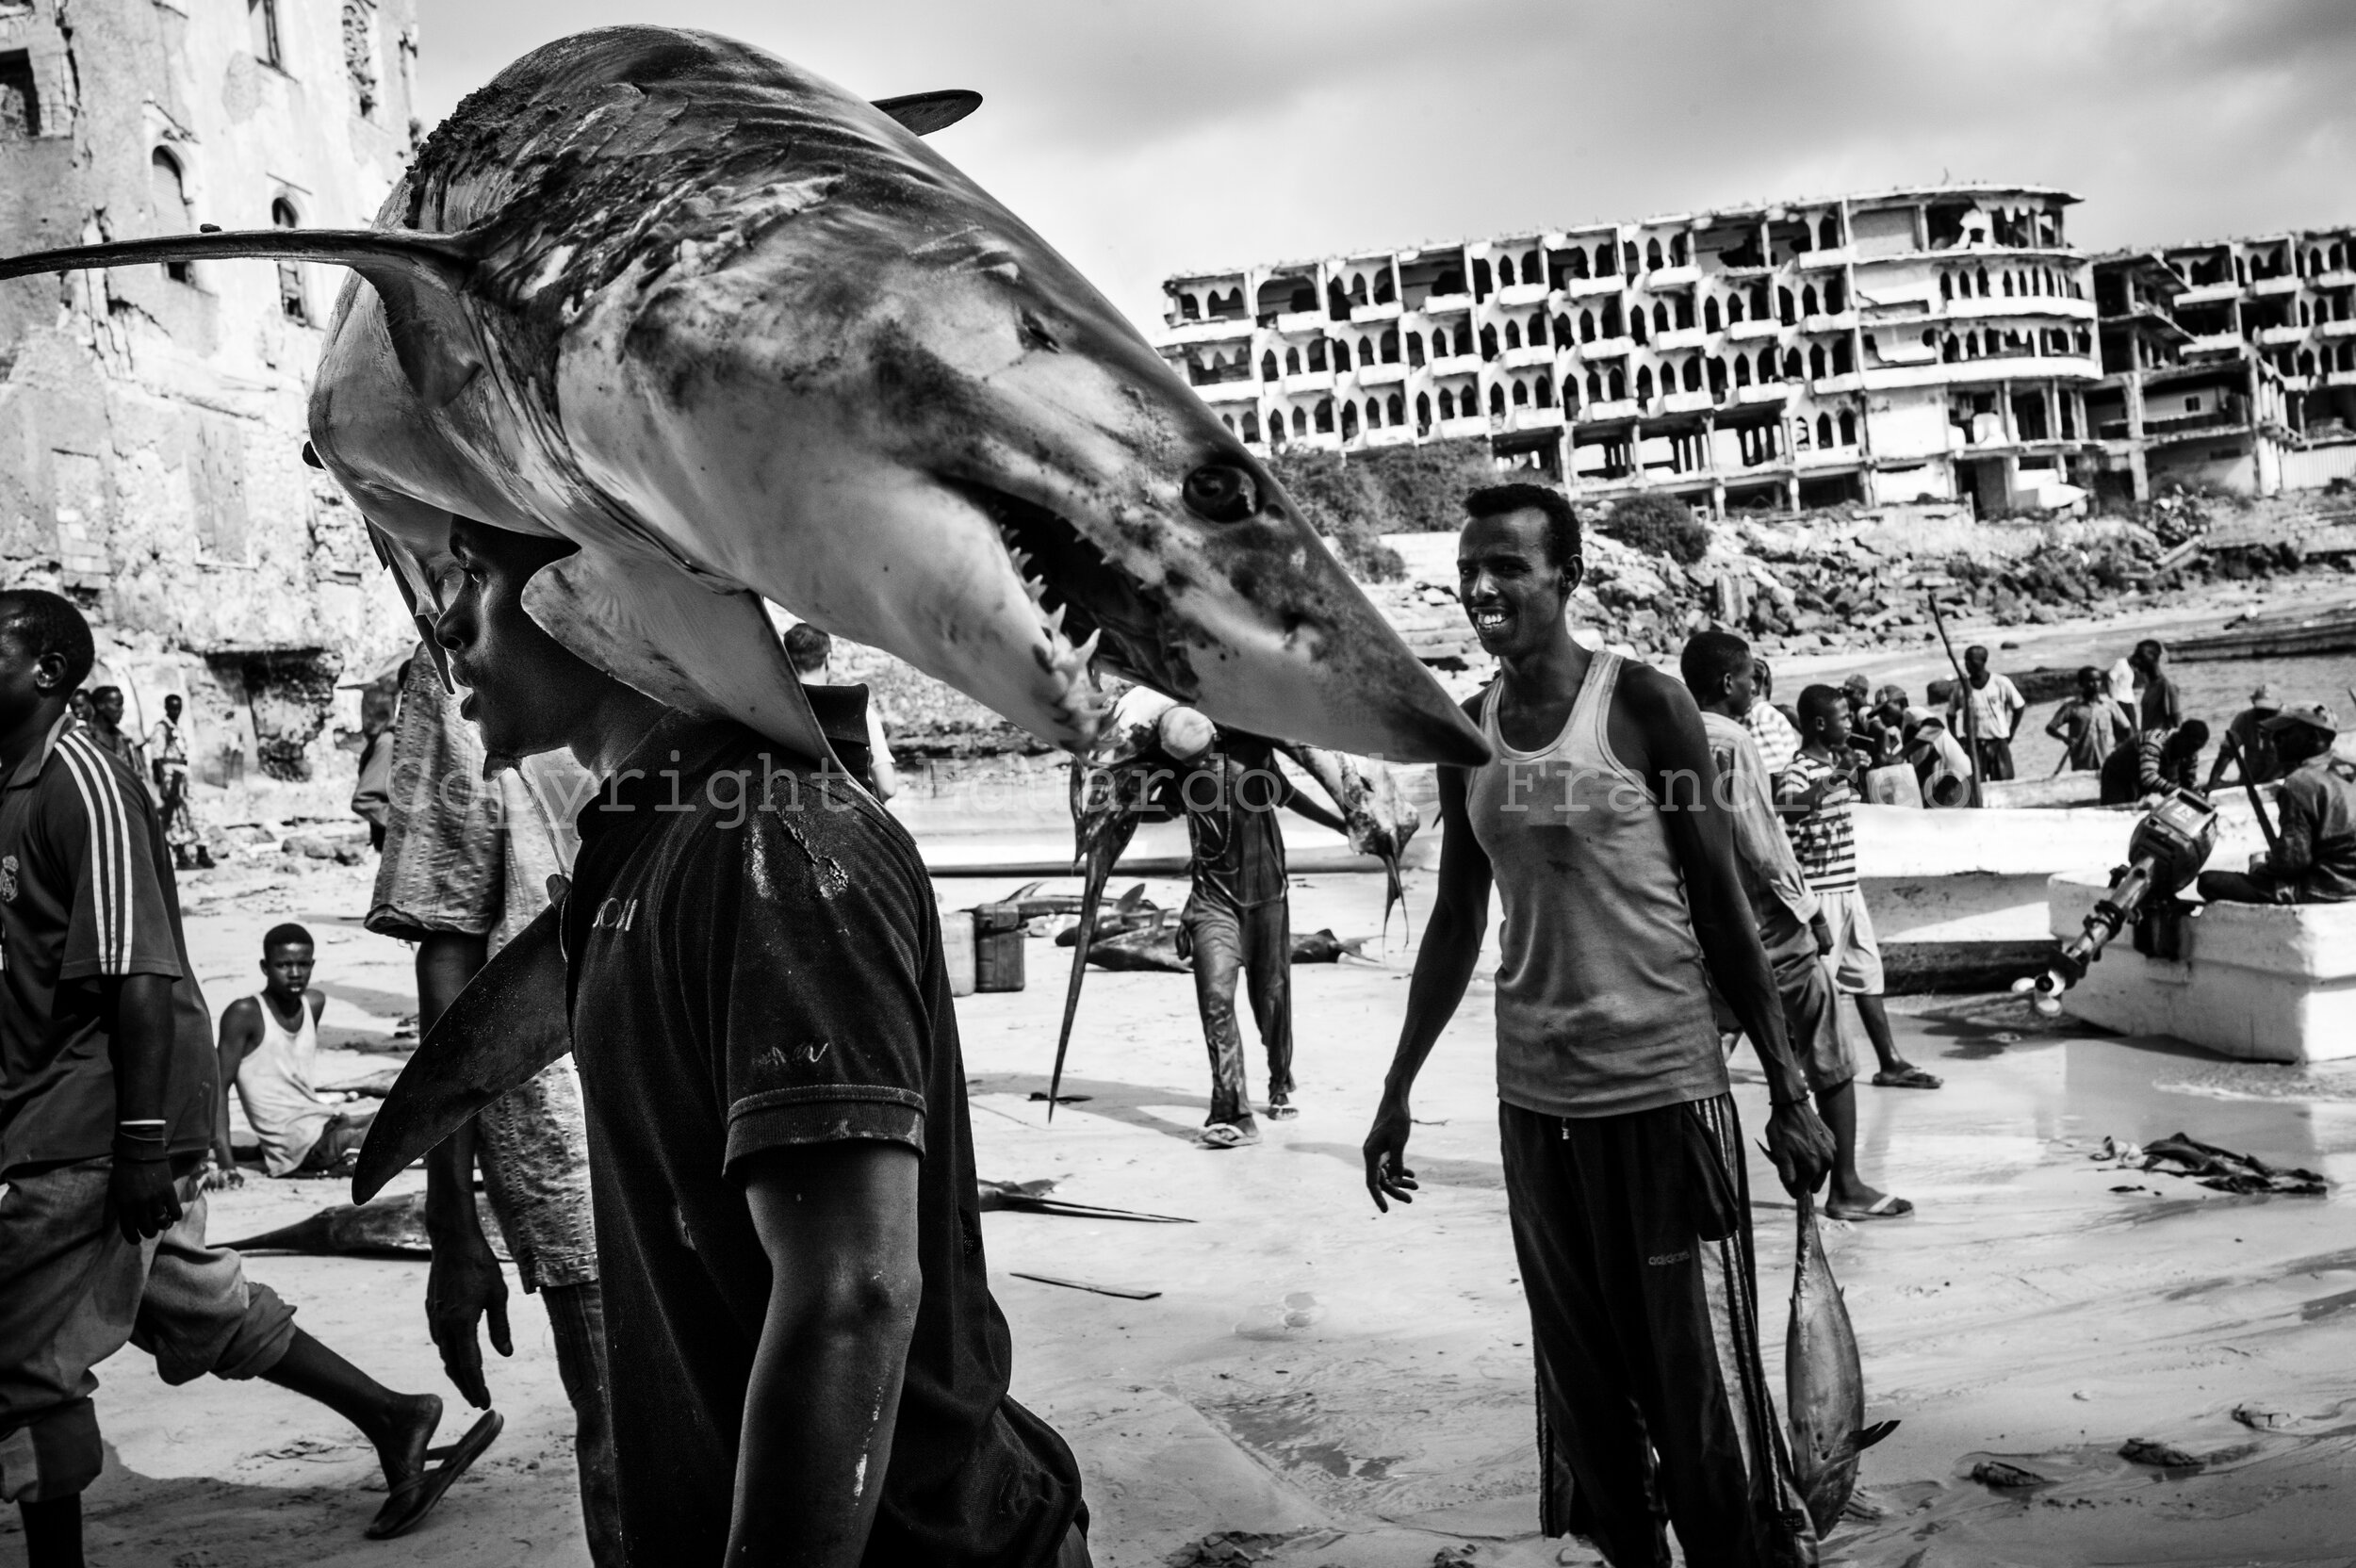  Mogadishu fishing port, a small beach where small artisanal boats disembark relatively big amounts of fish every day including sharks, manta rays and turtles.  Fisheries are an artisanal industry in Somalia, and fishermen use small boats that can't 